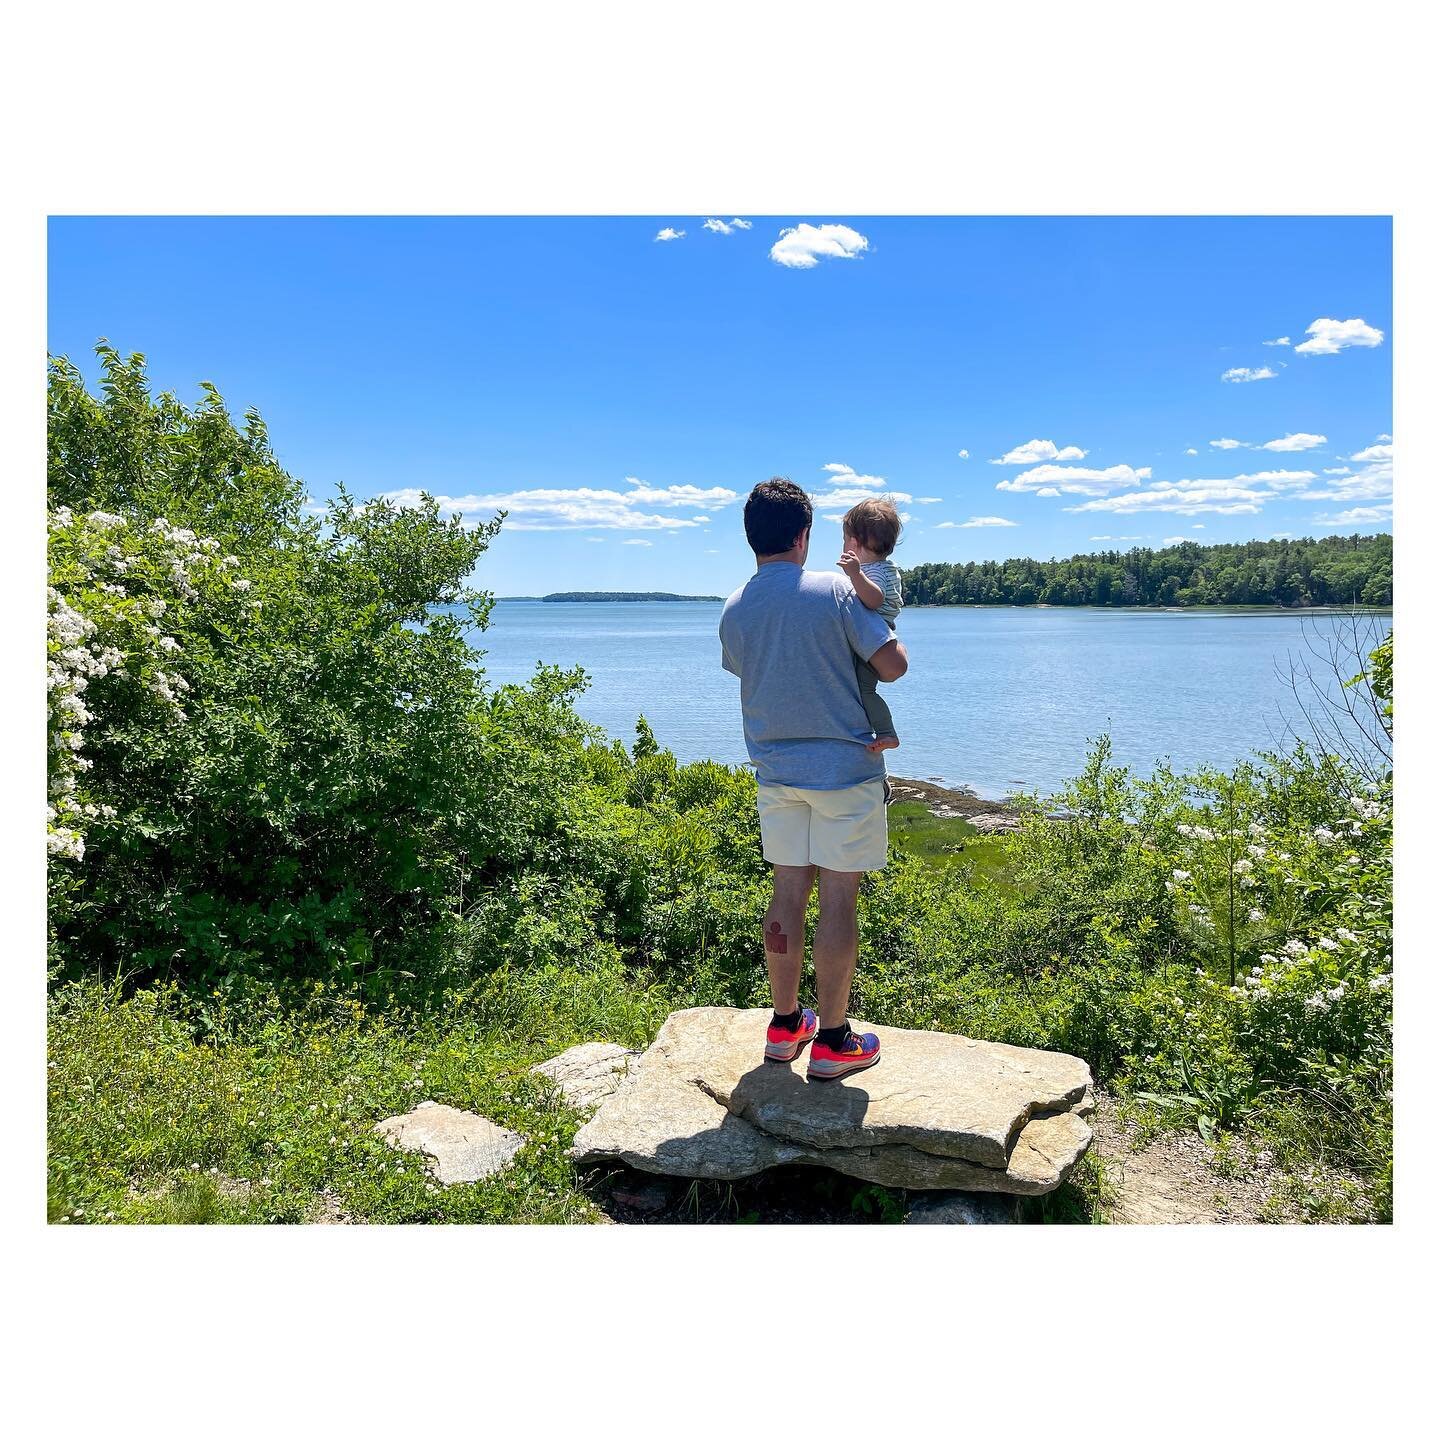 Everything the light touches is our kingdom&hellip;
*
*
*
*
*
*
*
*
*
*
*
*
*
*
#maine #lovewhereyoulive #lionking #dadlife #dadandson